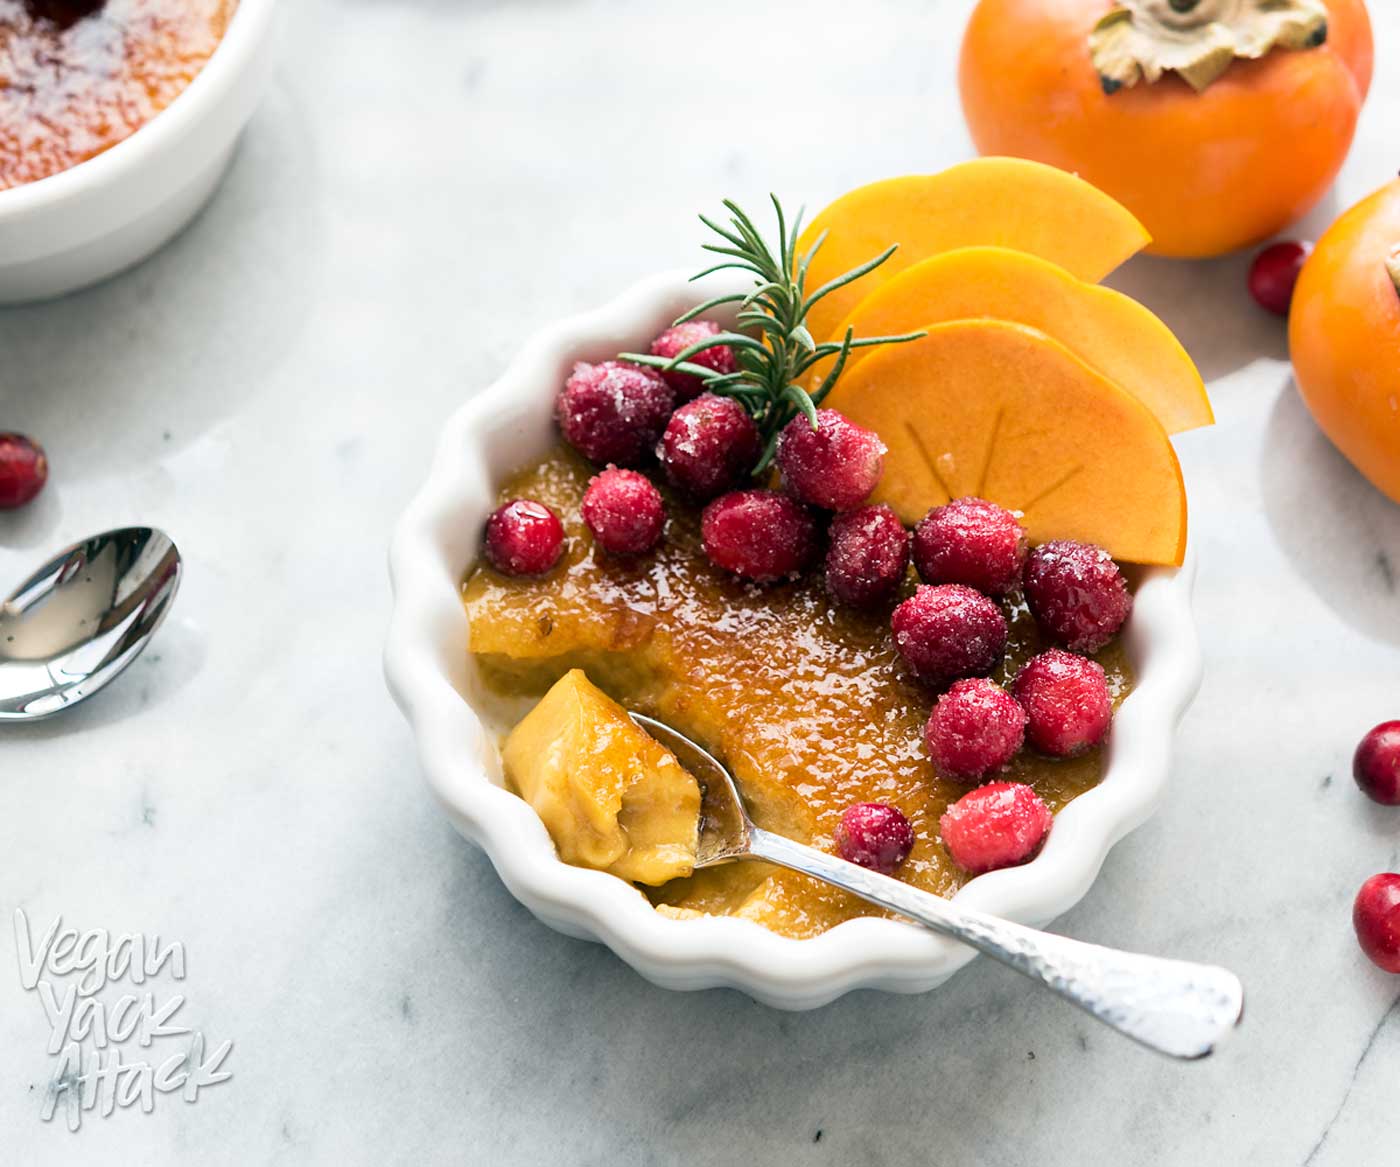 Looking for a stunning holiday dessert that is easy-to-make? Check out this impressive, vegan Persimmon Crème Brûlée with Sugared Cranberries! Made with Silk’s Vanilla Almond Creamer. #SilkCreamer #glutenfree #soyfree